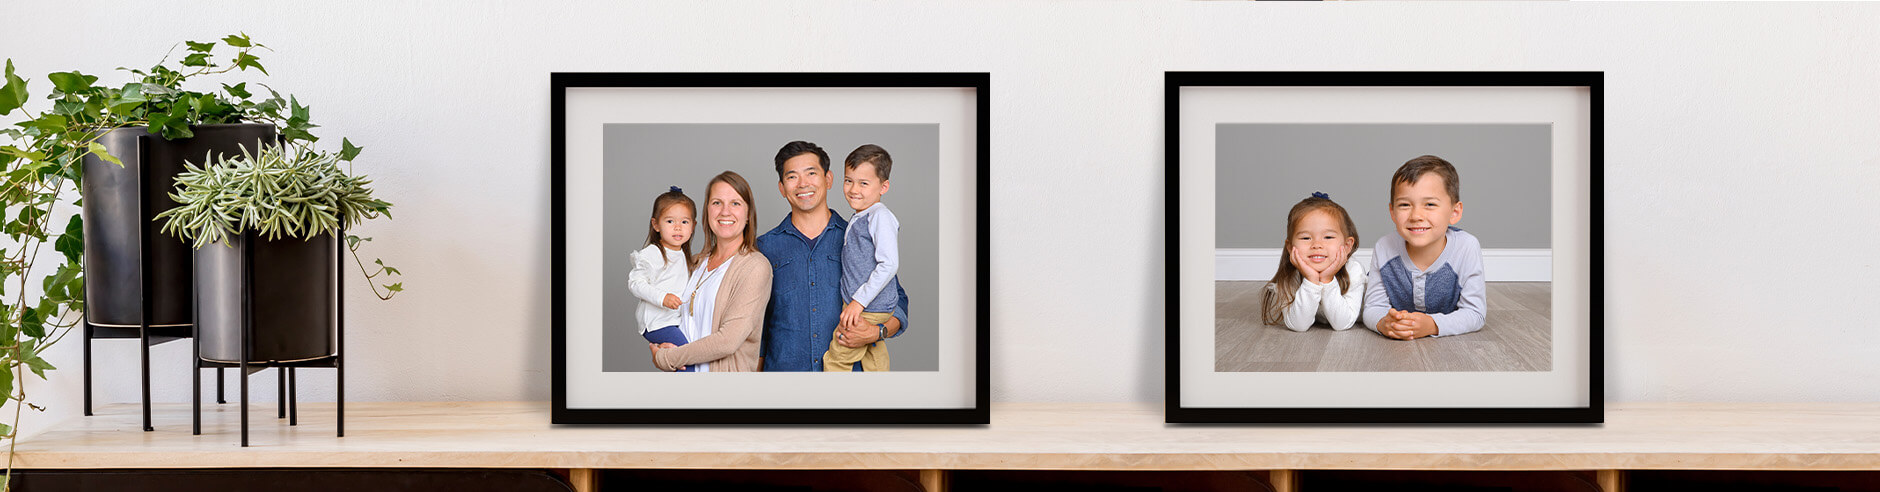 Family photography is showcased on framed prints within the home.